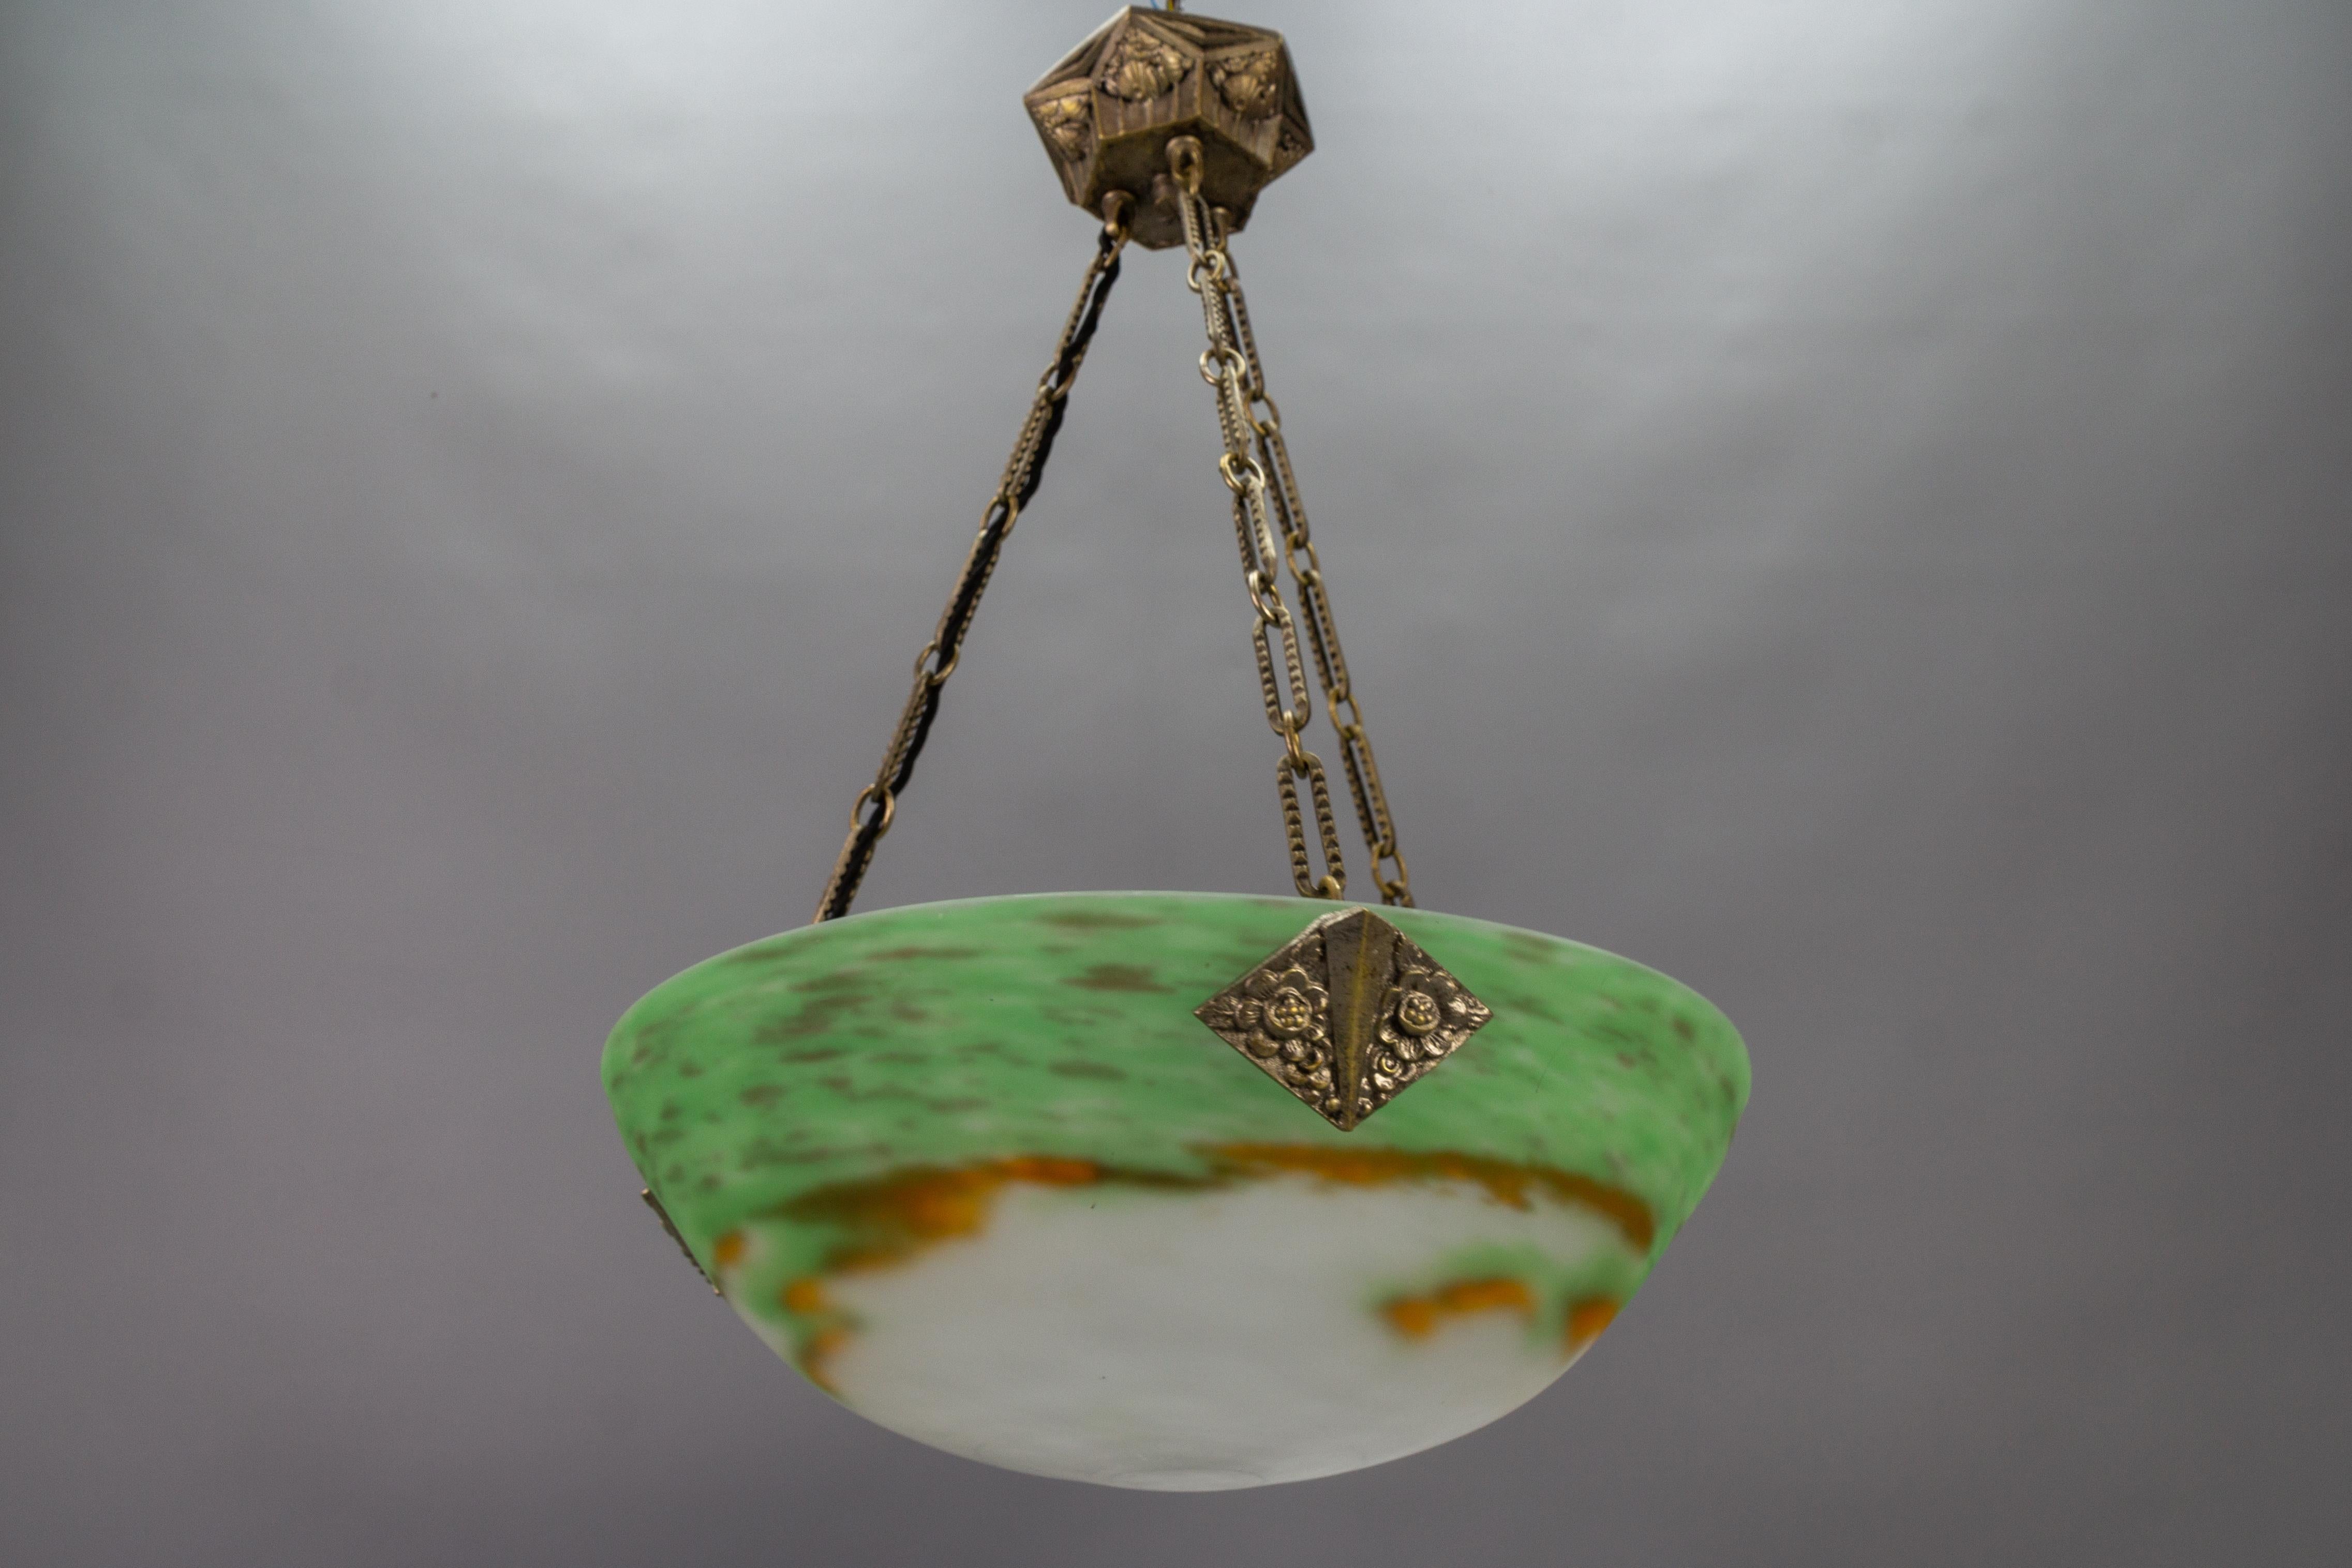 French Art Deco Green Glass Pendant Light by Muller Frères Luneville, 1920s For Sale 2